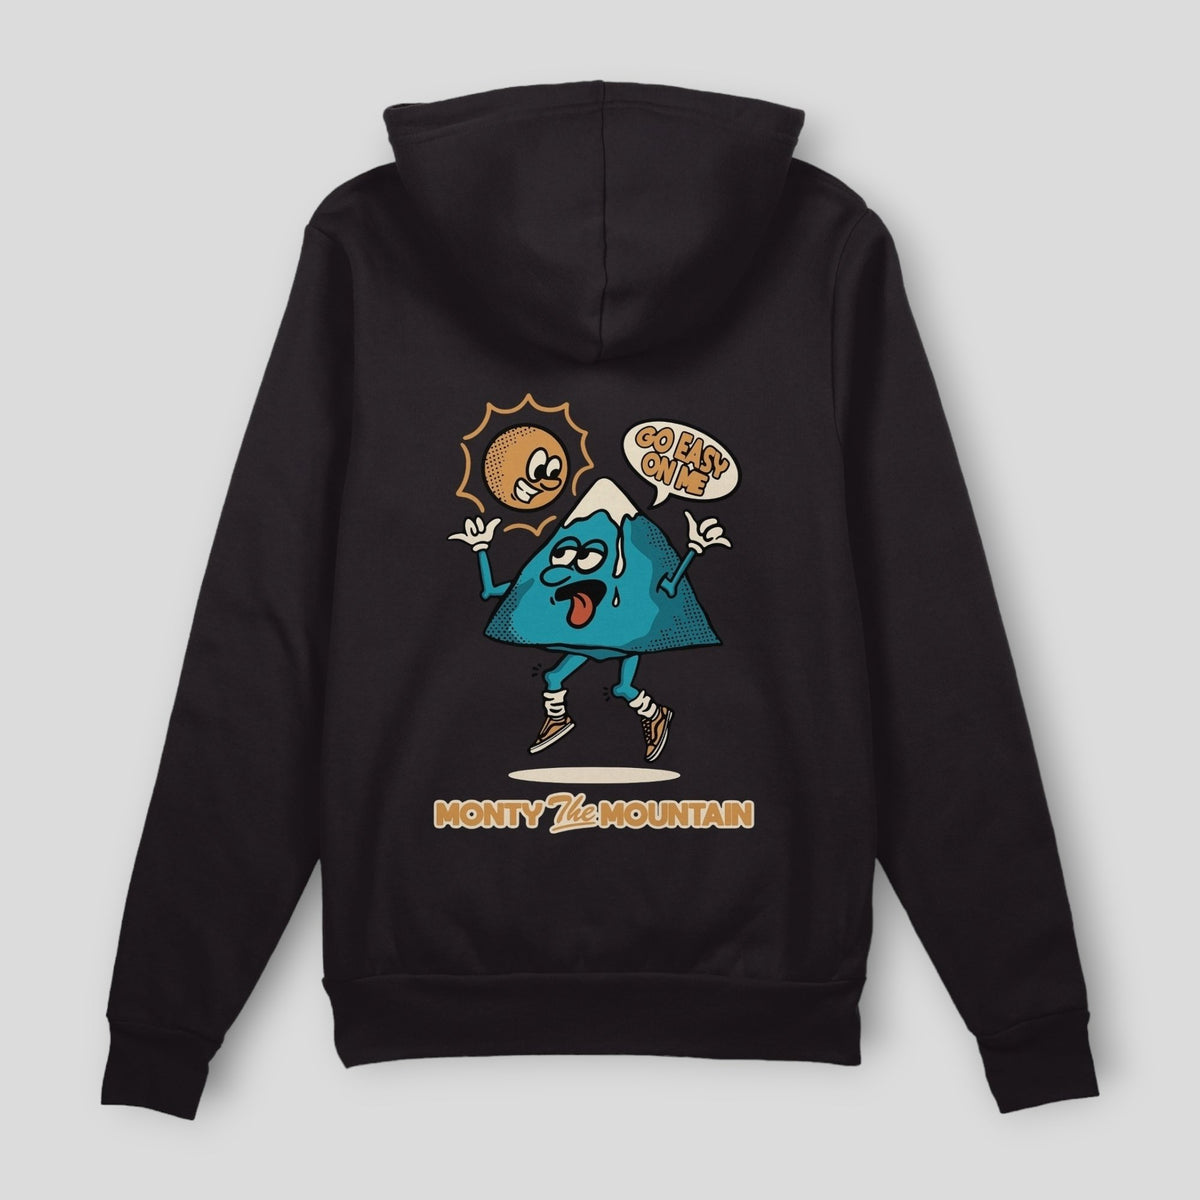 Limited Edition "Monty The Mountain" Hoodie - Stoked&Woke Clothing